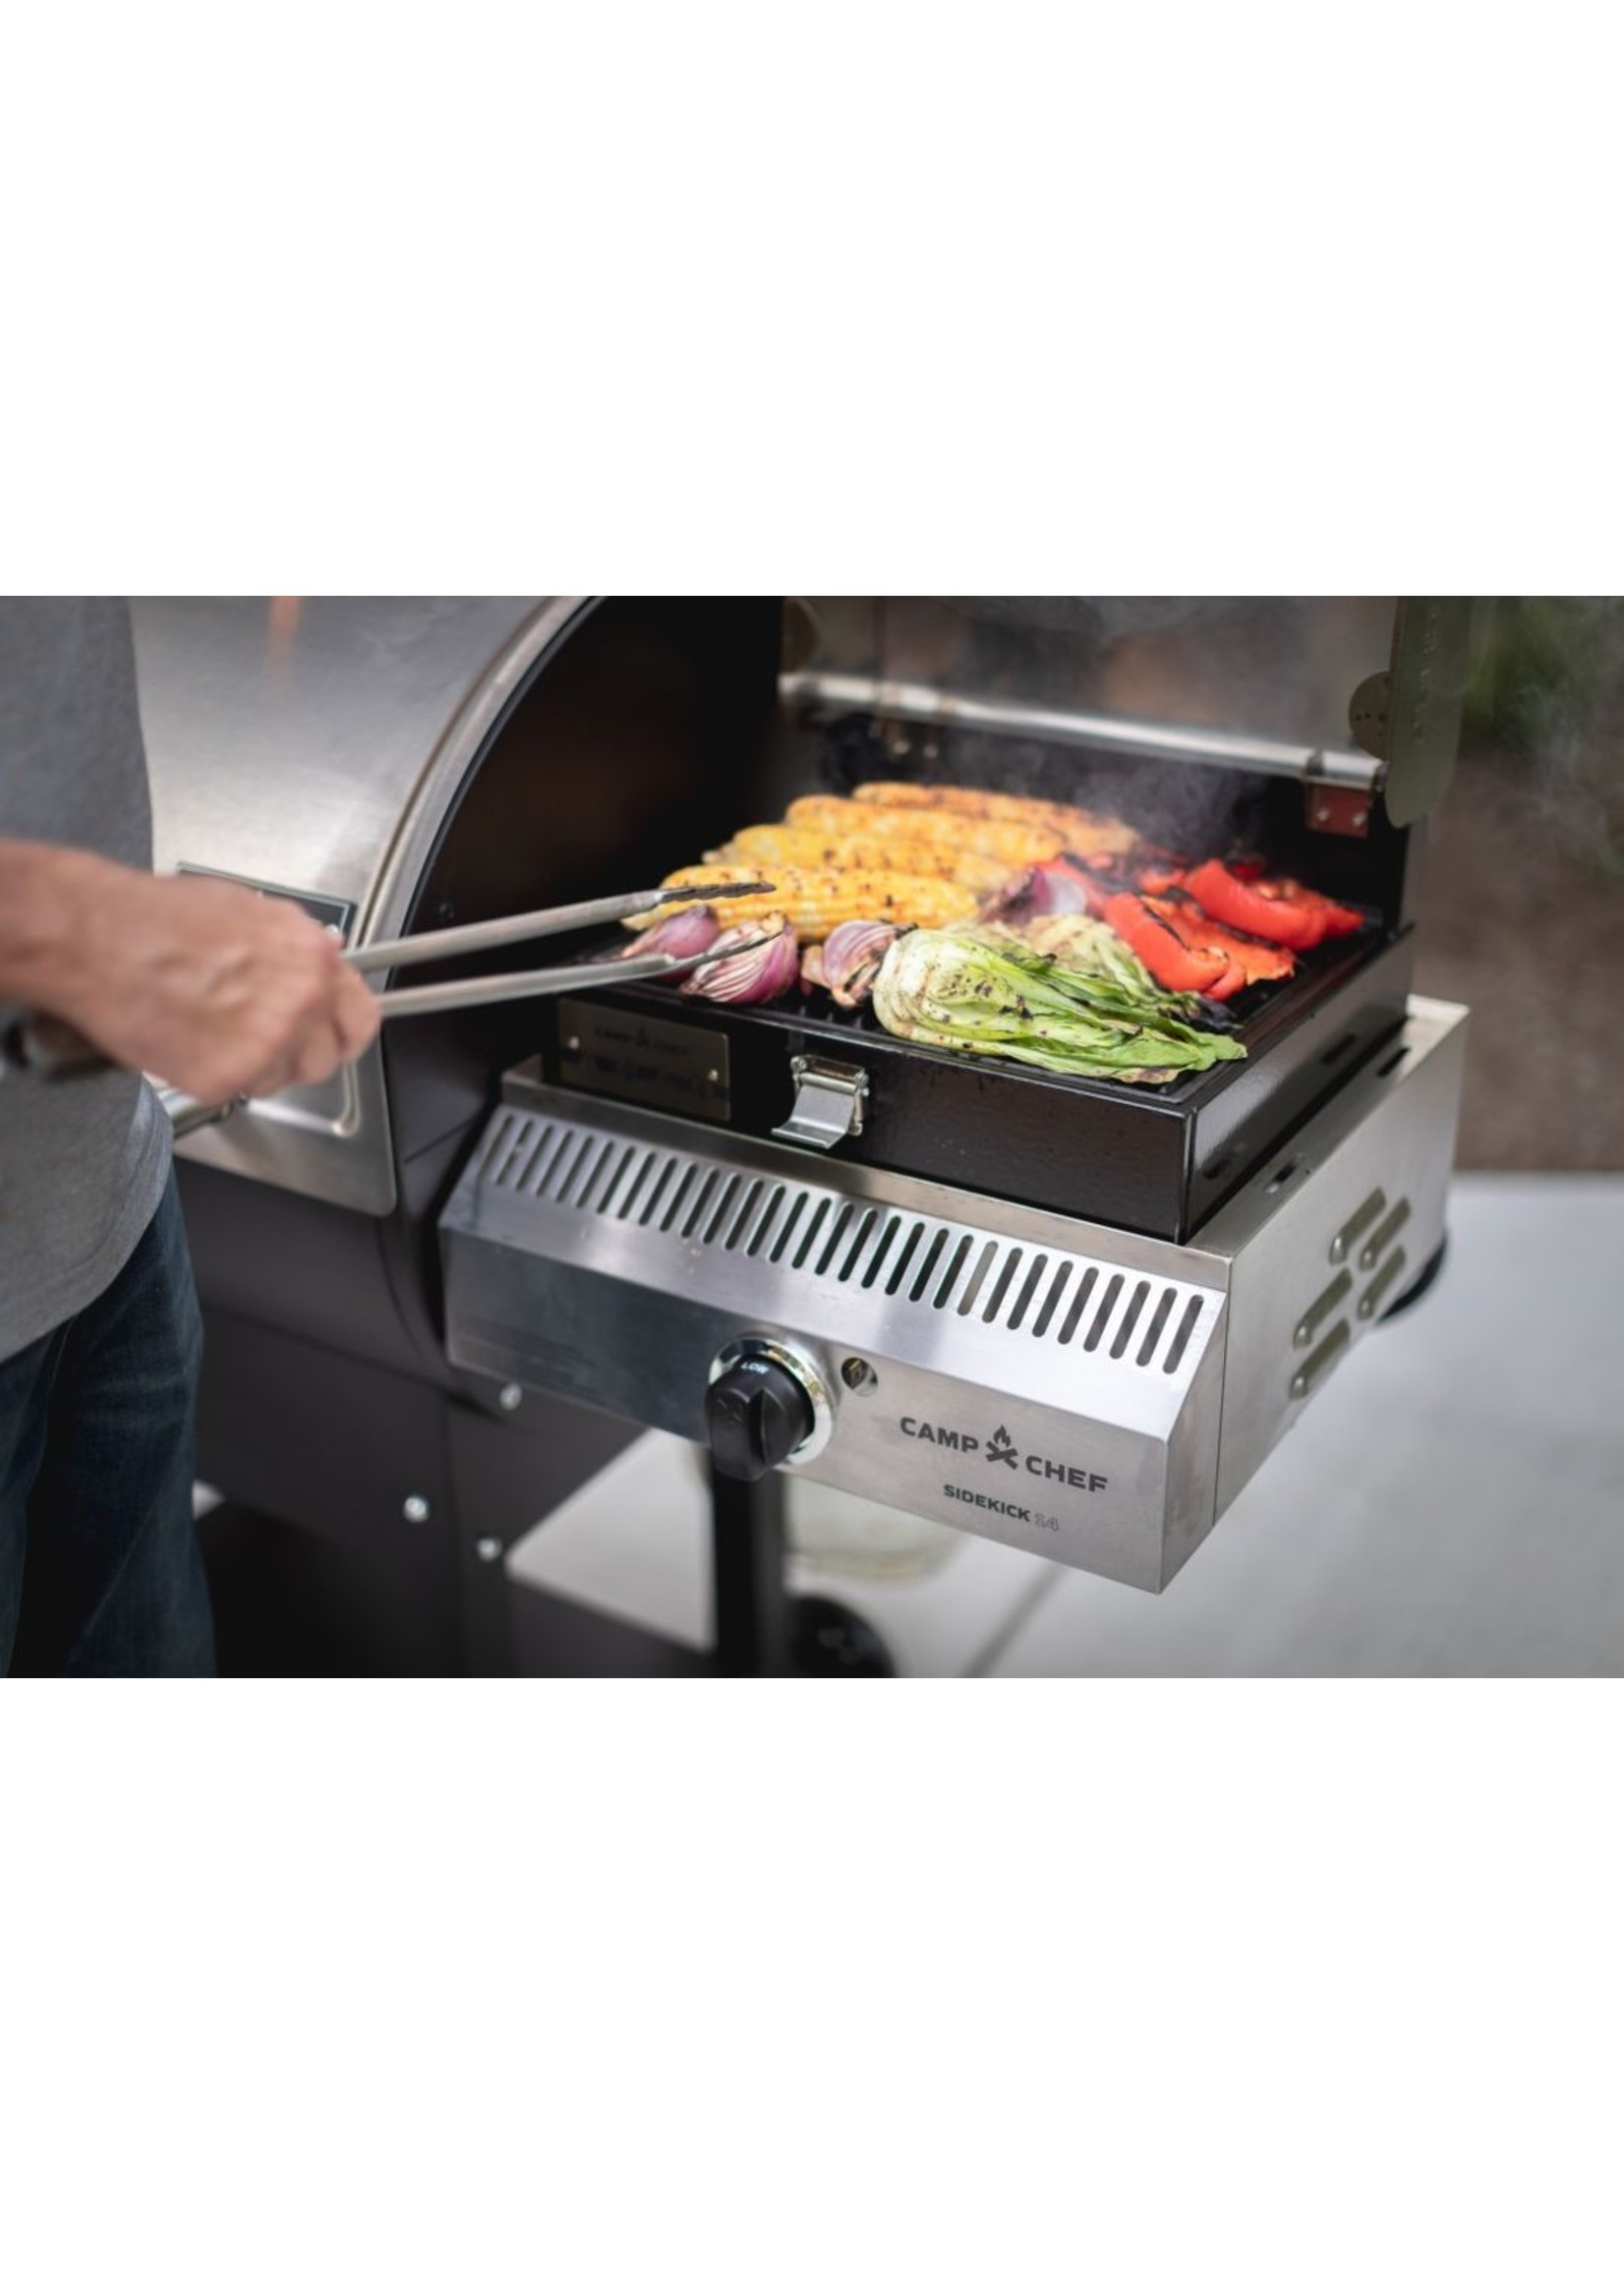 Camp Chef Camp Chef 14” Sidekick Sear(Includes Stainless Steel BBQ Box)